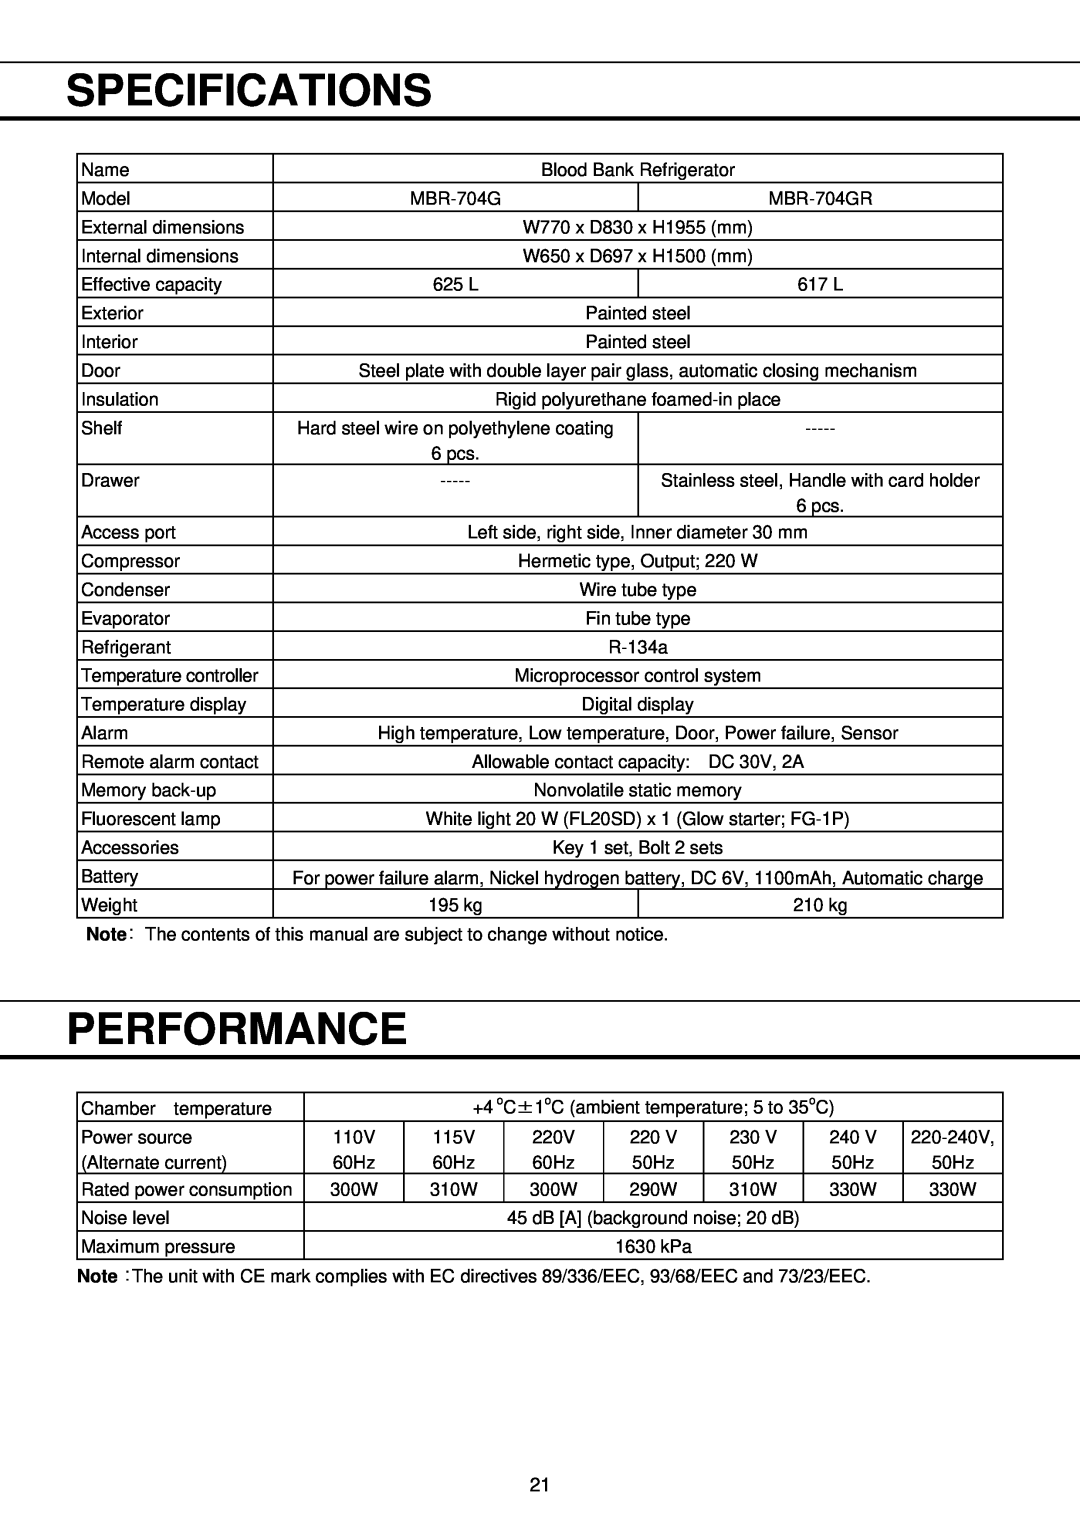 Sanyo MBR-704GR instruction manual Specifications, Performance 